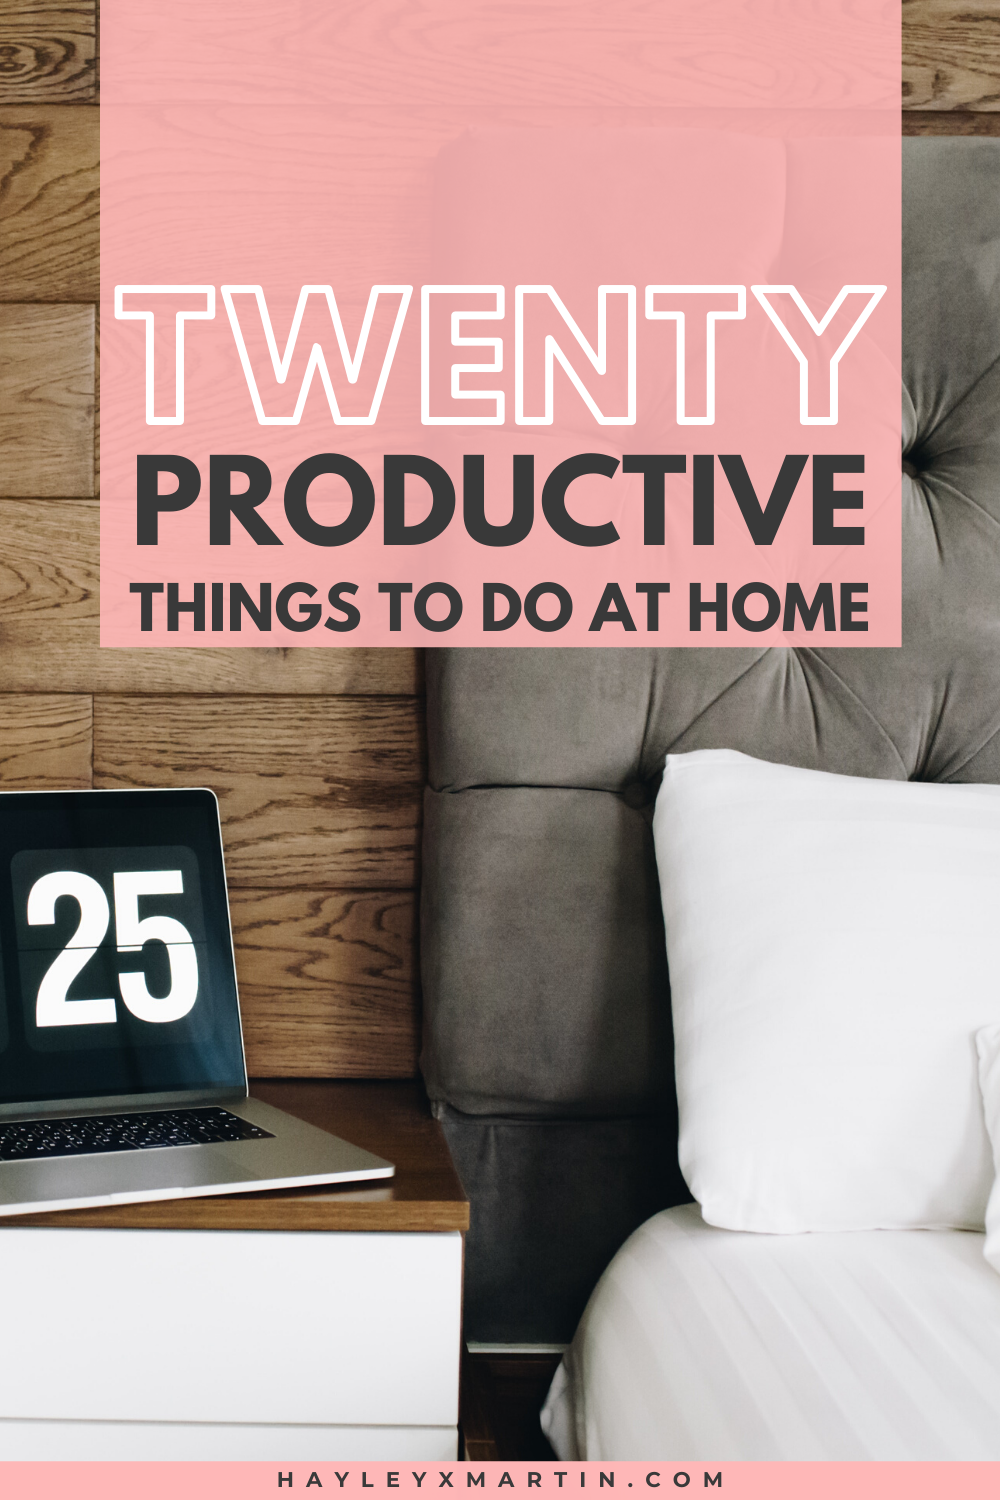 TWENTY PRODUCTIVE THINGS TO DO AT HOME | HAYLEYXMARTIN